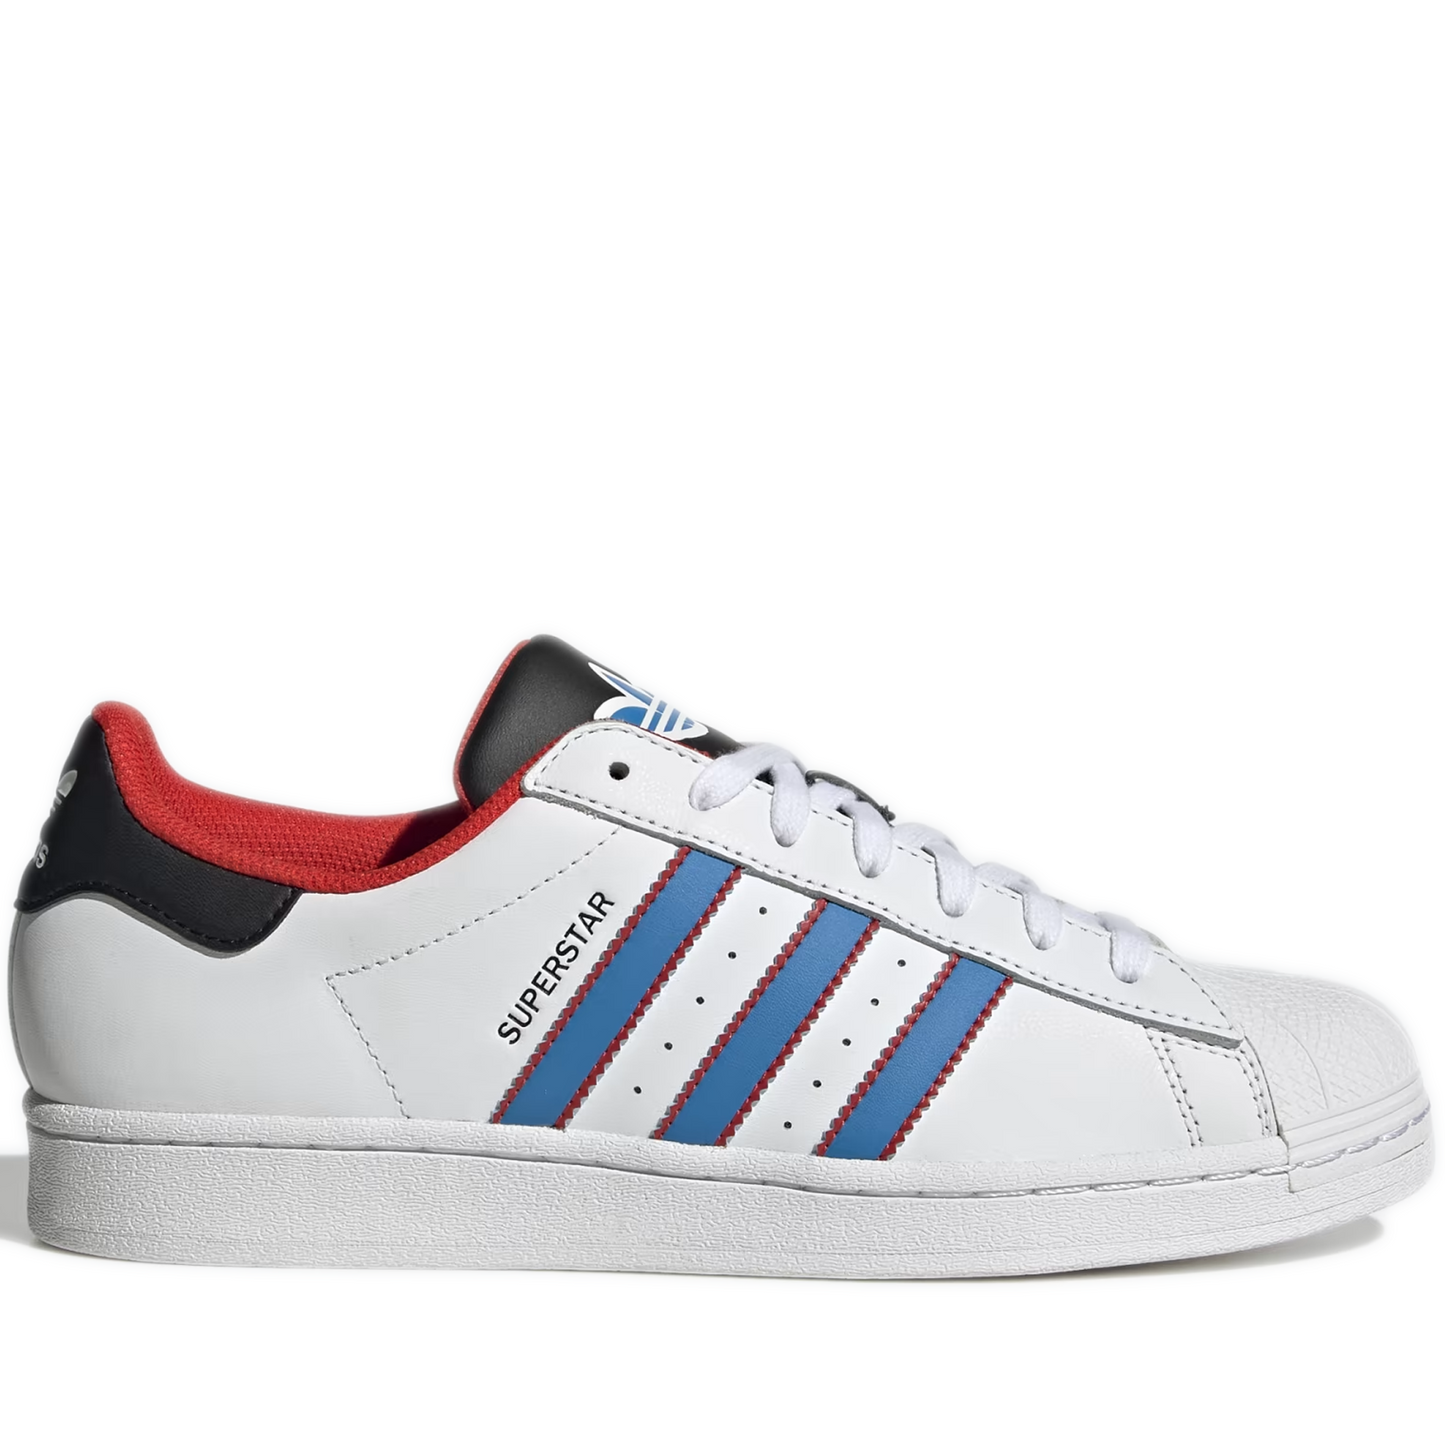 Men's Adidas Superstar Shoes - White/ Blue/ Red